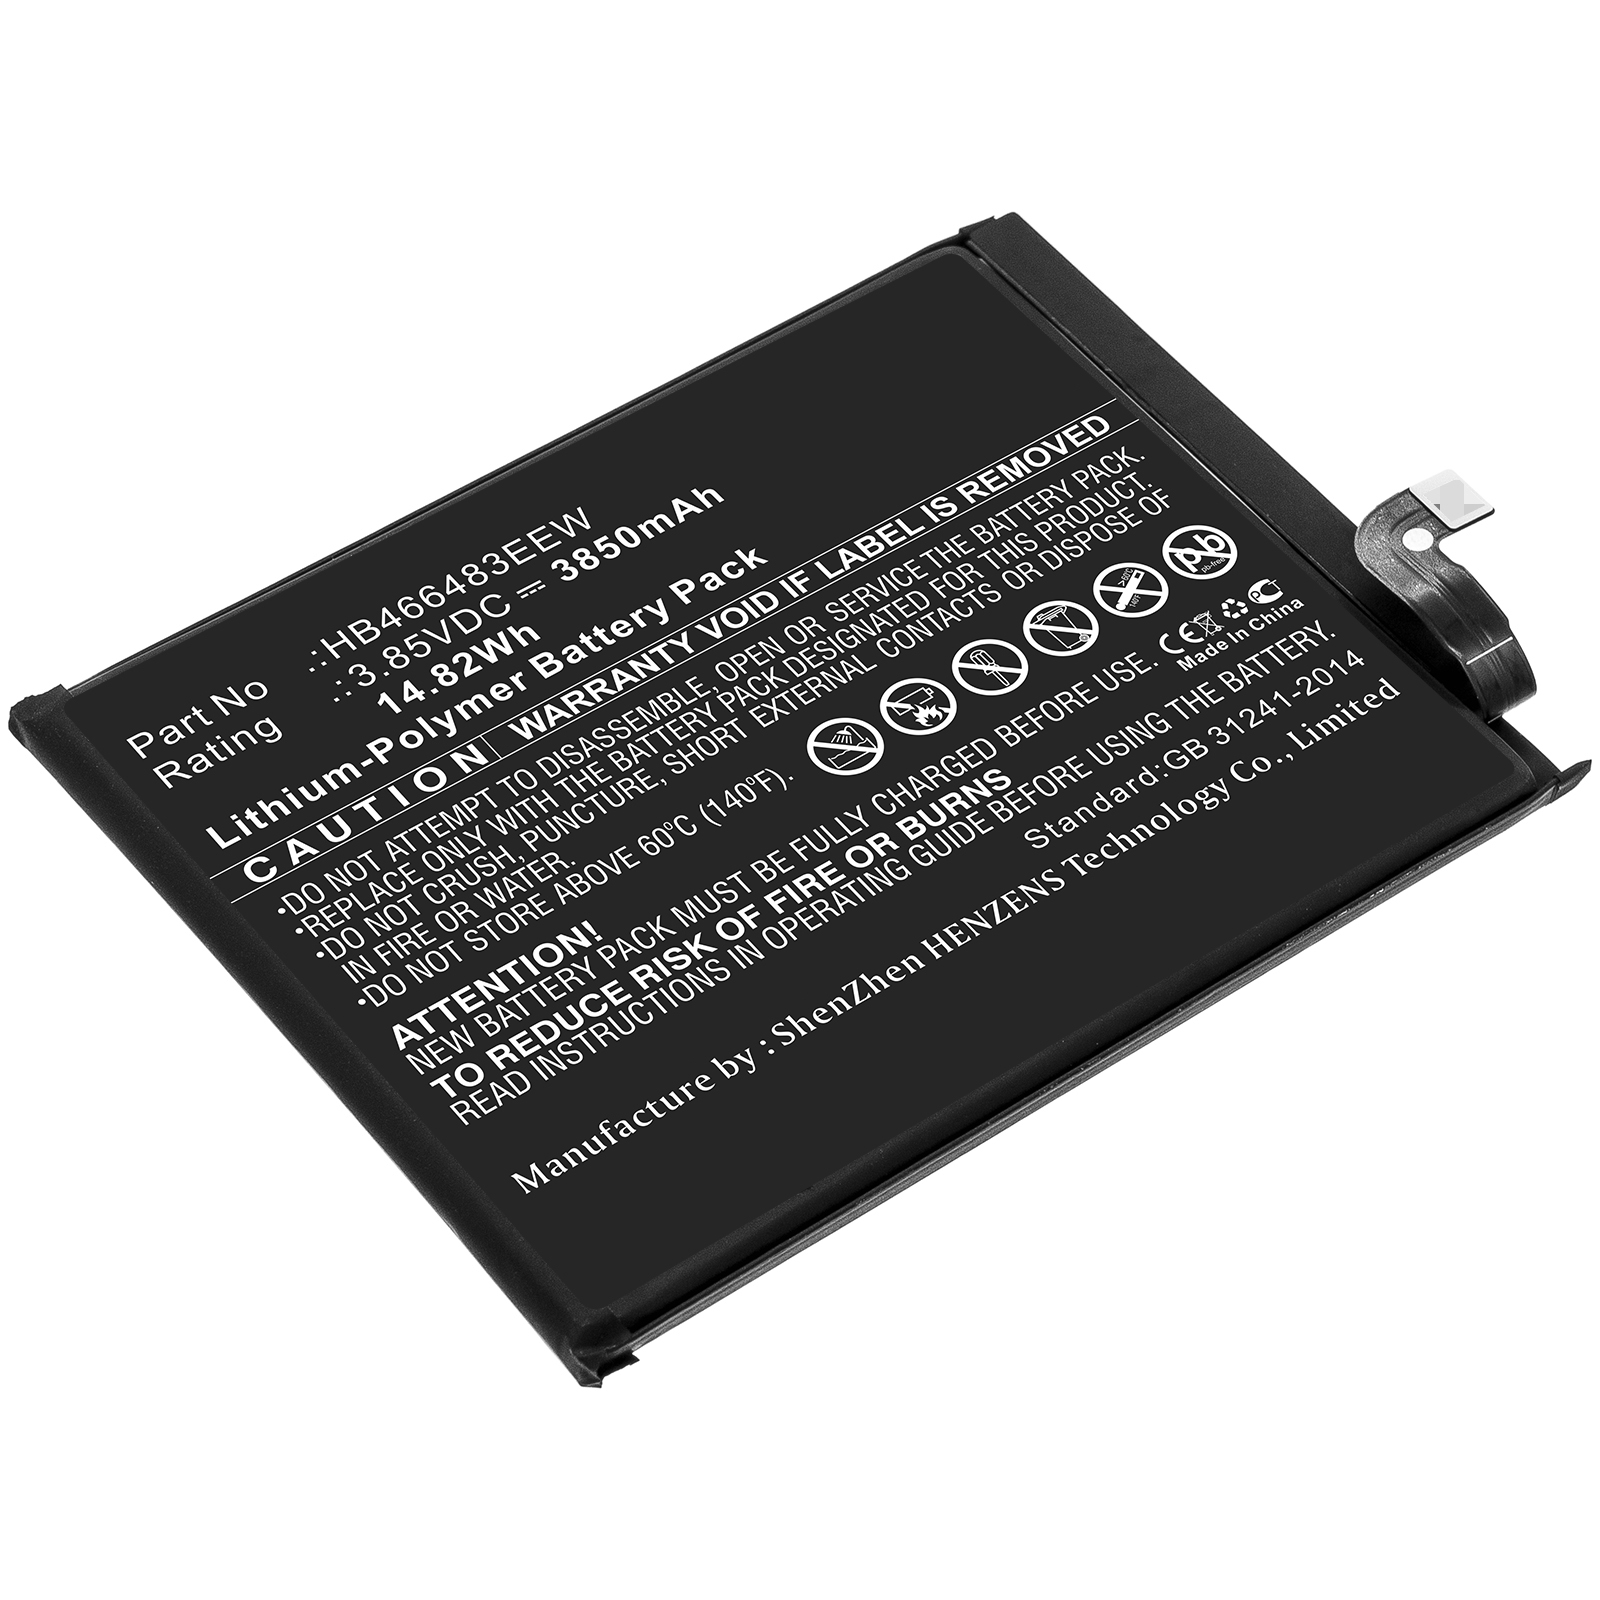 Synergy Digital Cell Phone Battery, Compatible with Huawei HB466483EEW Cell Phone Battery (Li-Pol, 3.85V, 3850mAh)